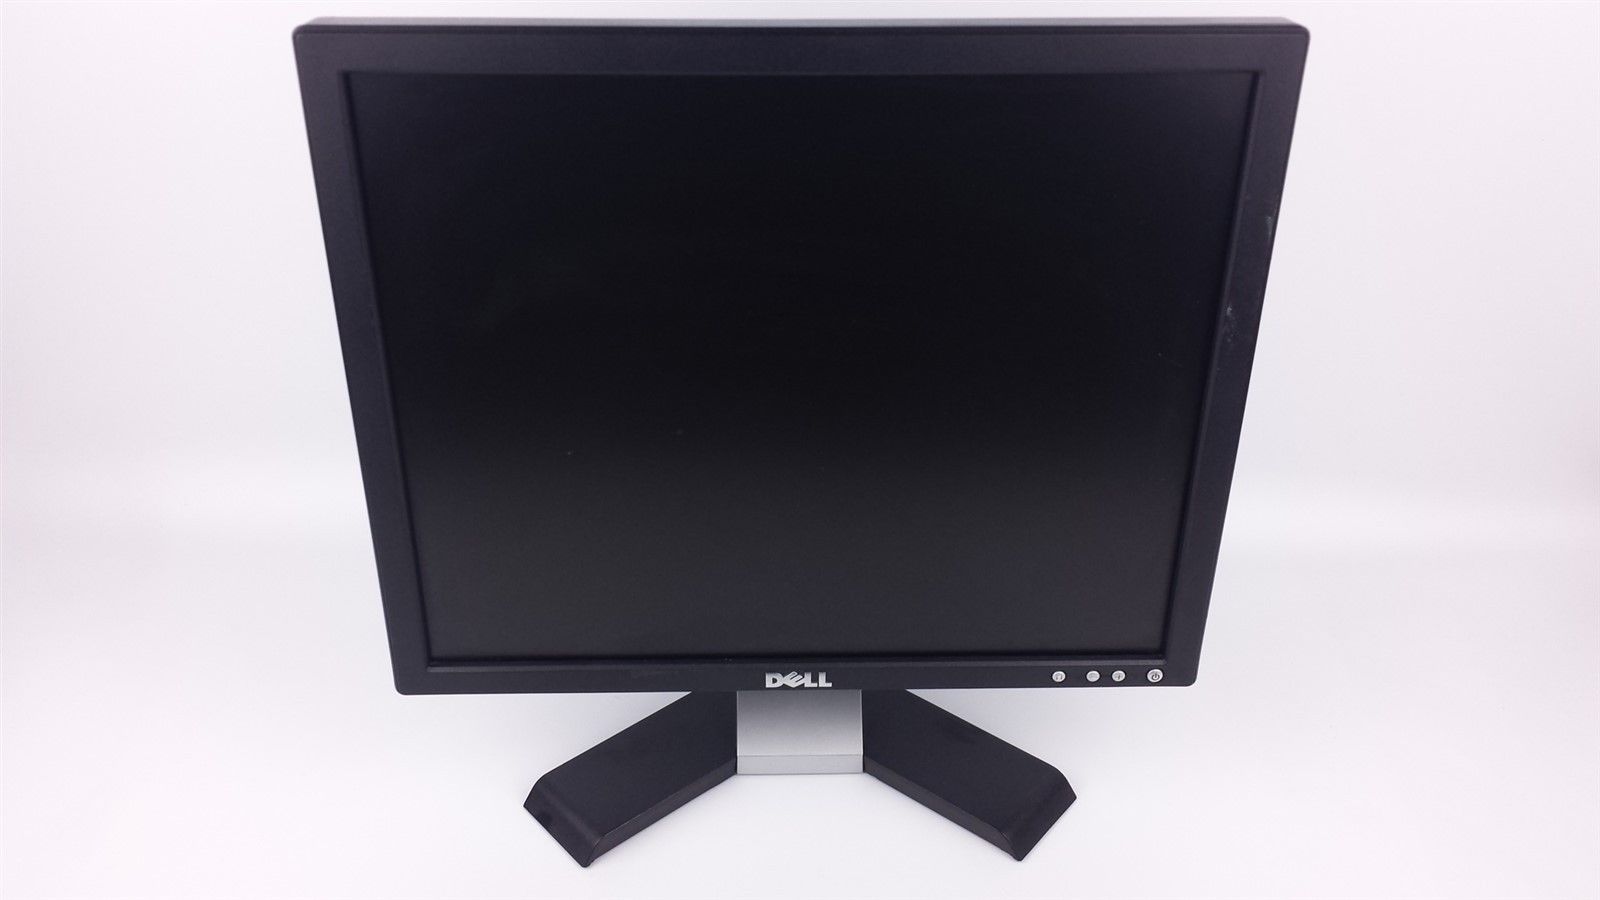 Dell E178FPV LCD Flat Panel Display Computer Monitor 17" with Power & VGA Cord